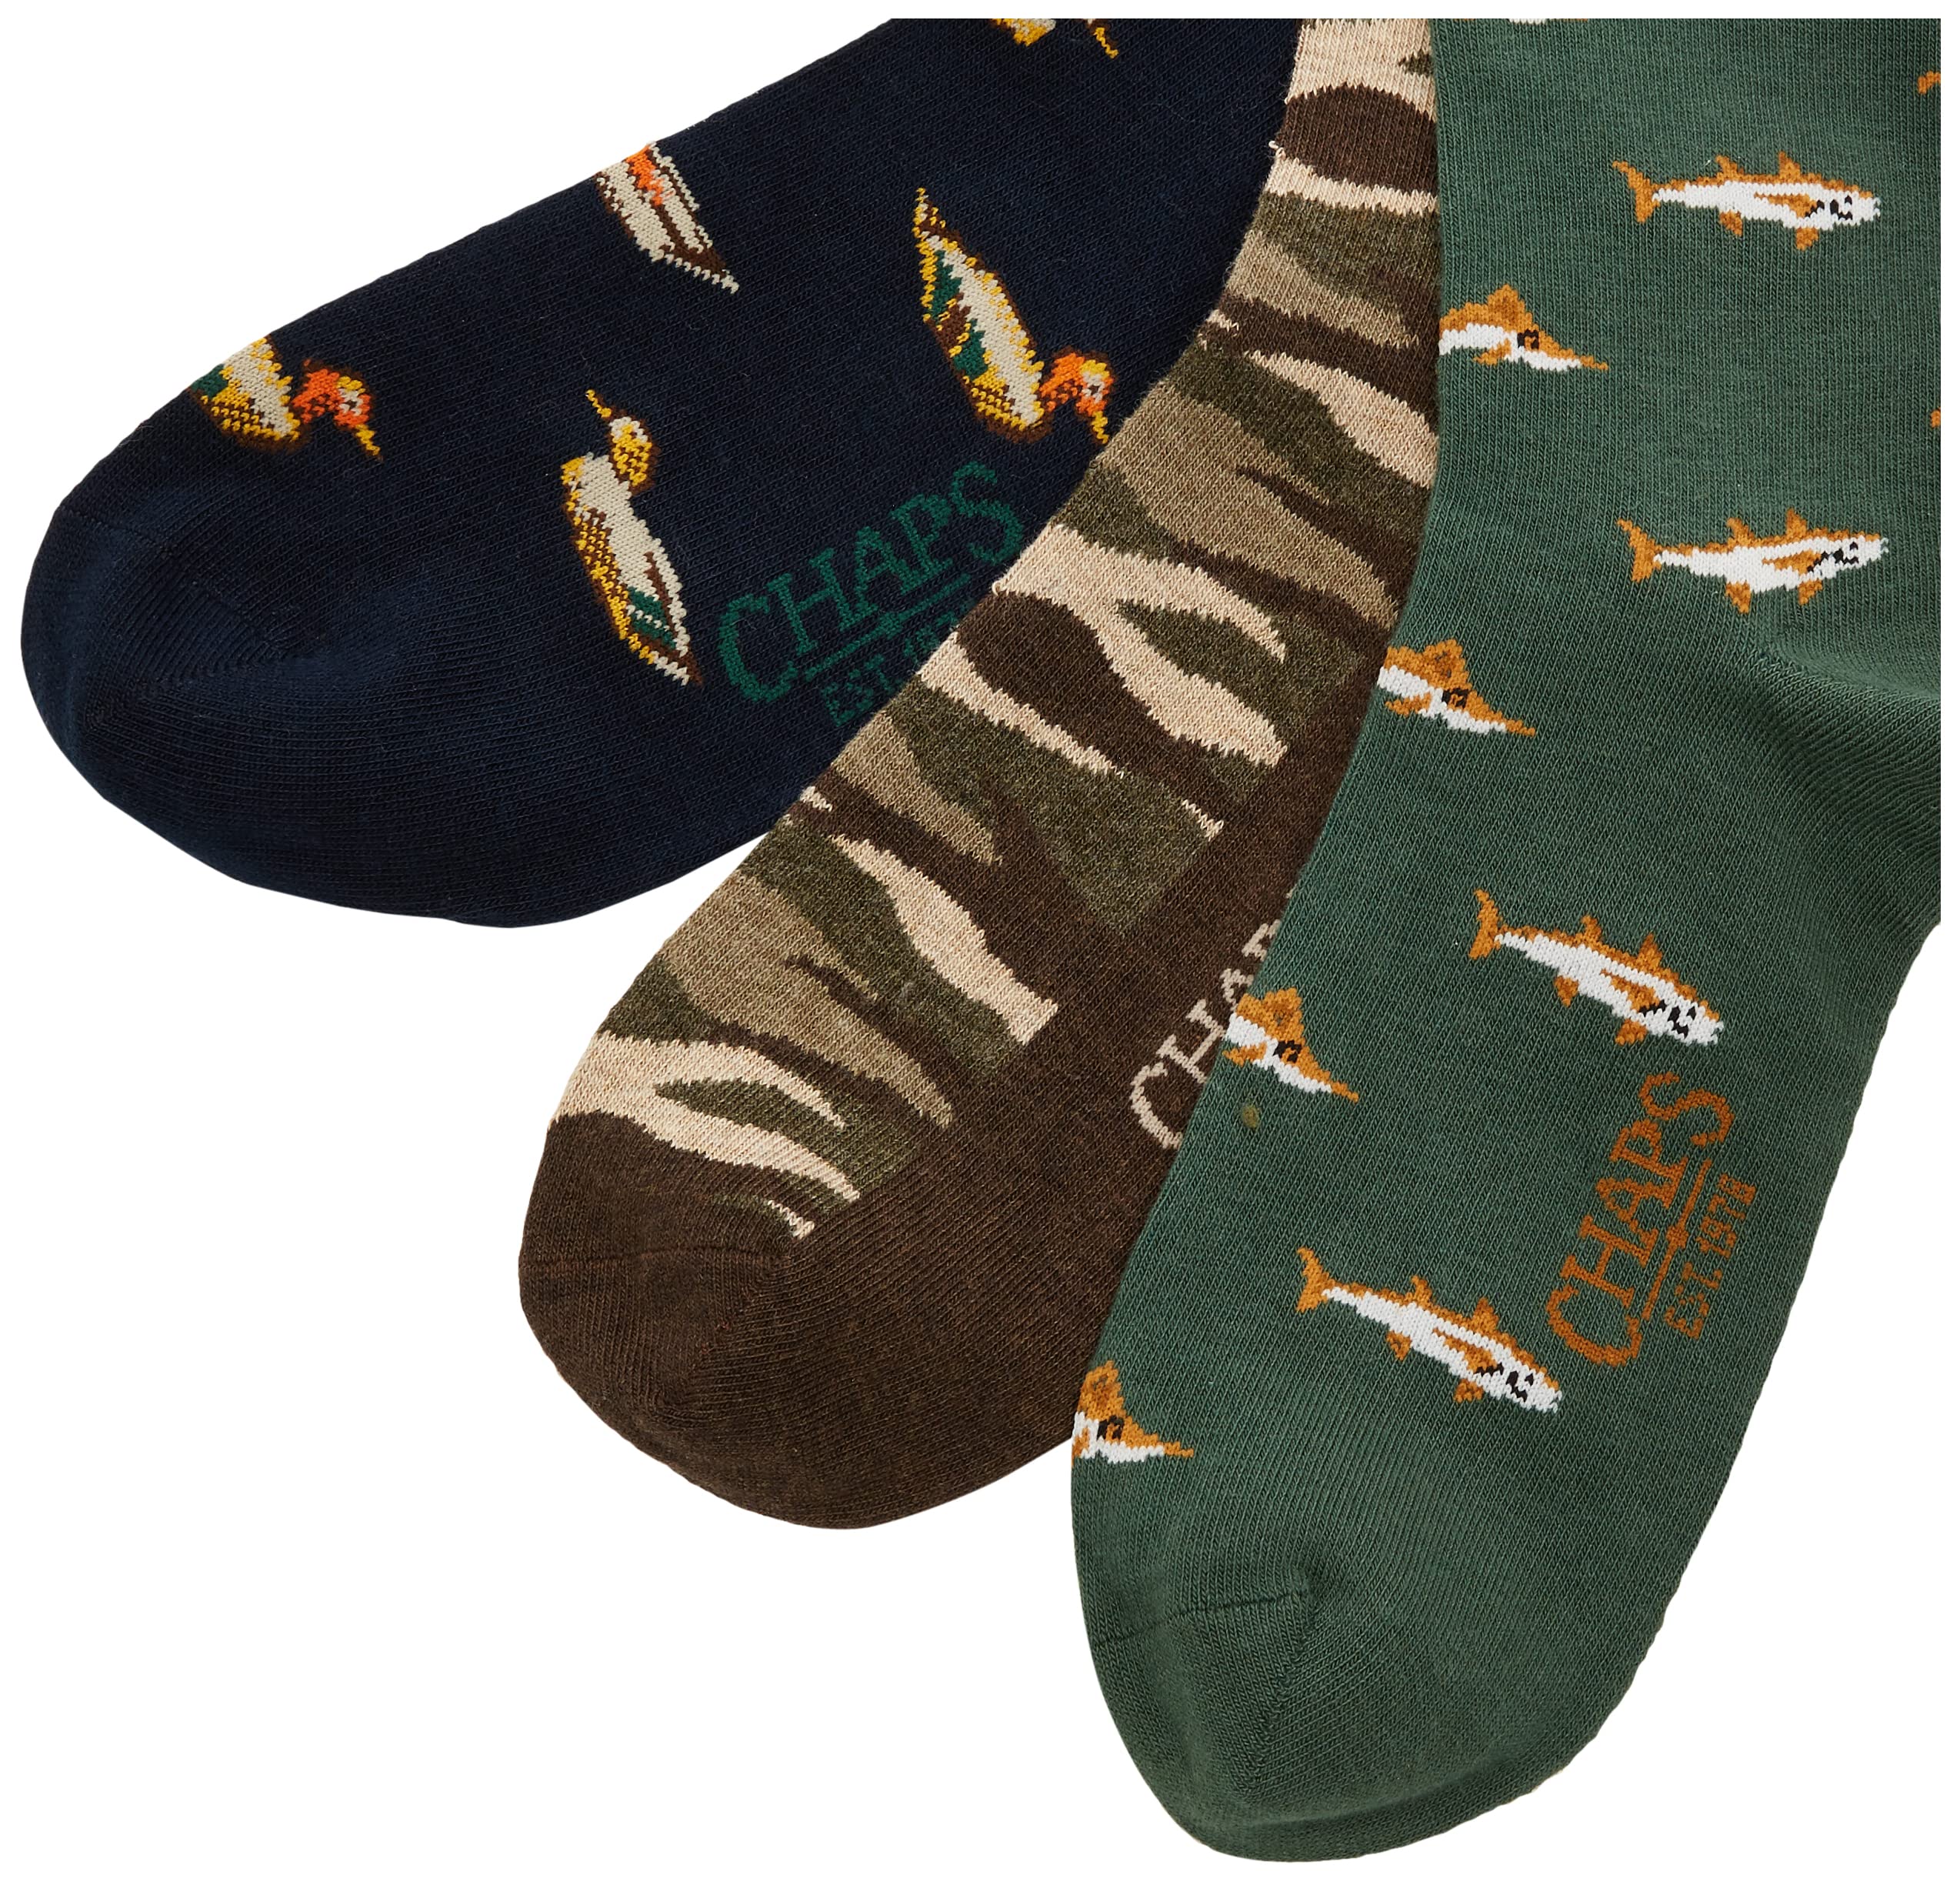 Chaps Men's Casual Fashion Cushioned Crew Socks-3 Pair Pack-Classic Designs with Stretch Blend